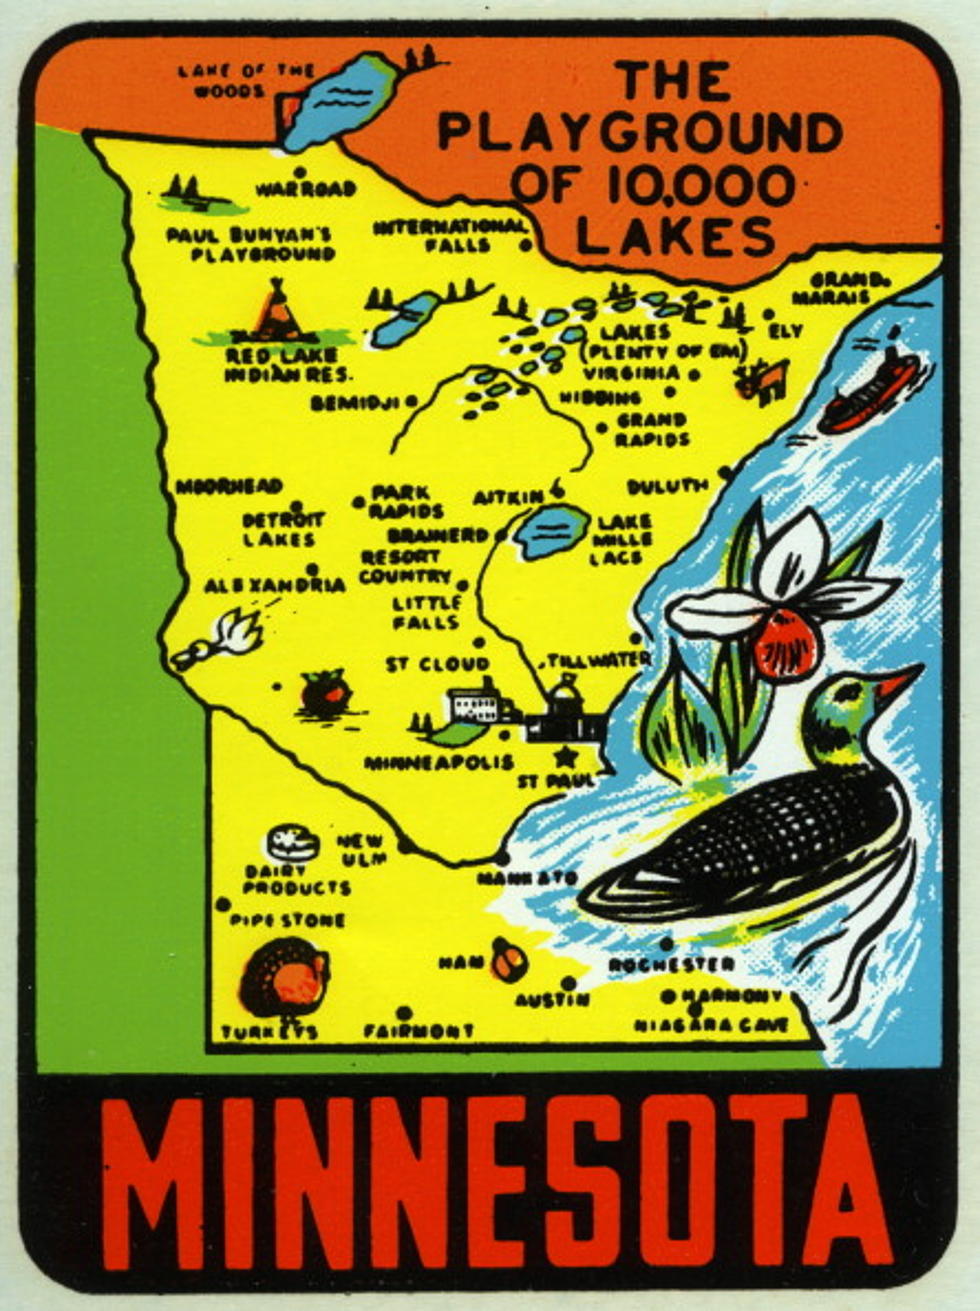 21 Great Things to Do in Minnesota